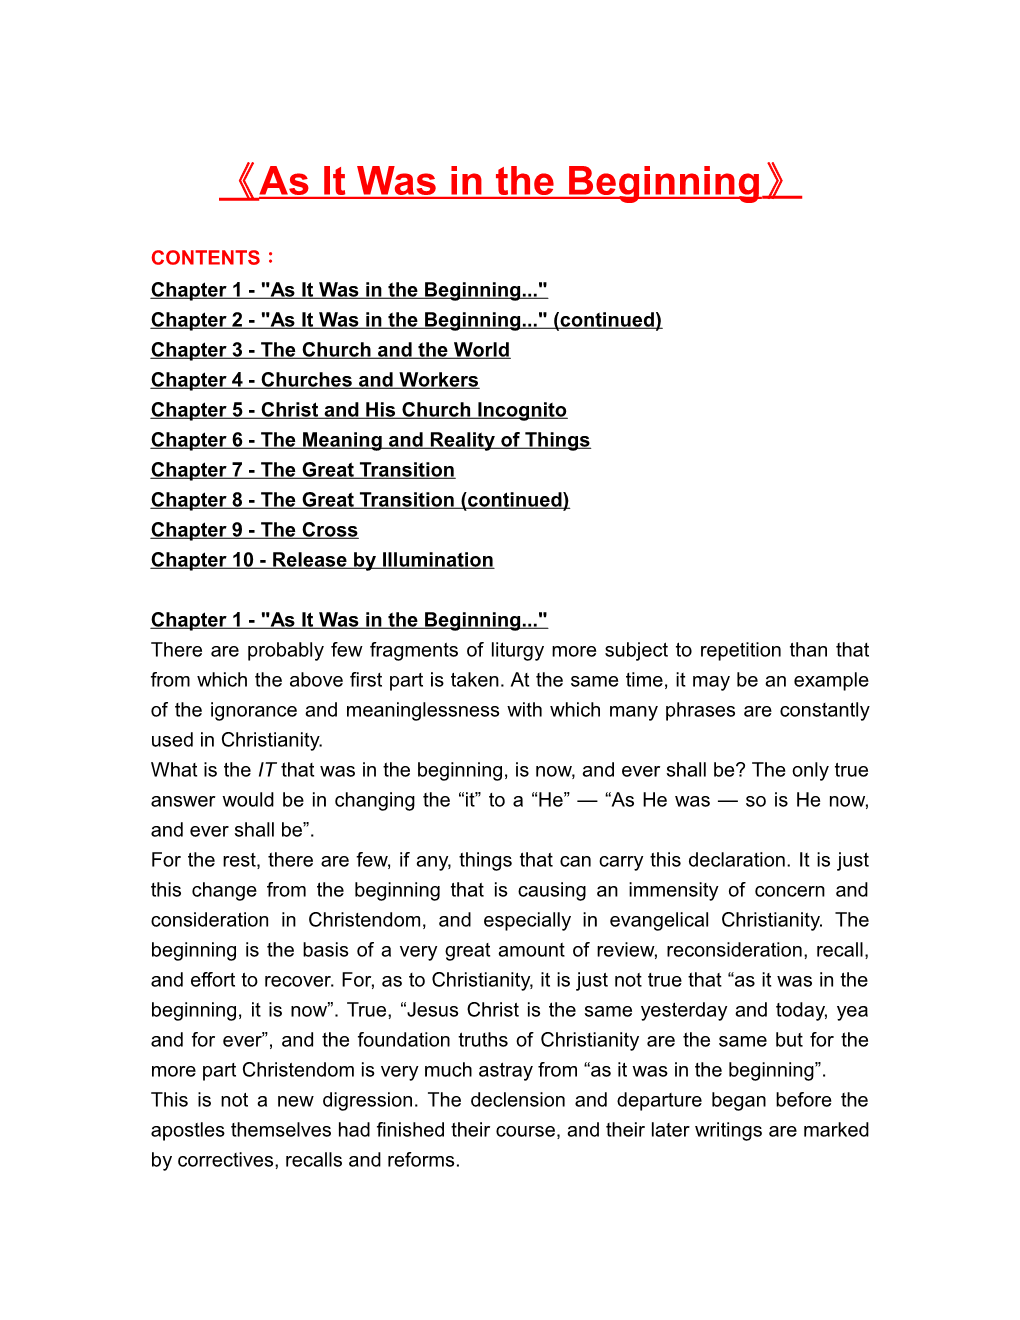 Chapter 1 - As It Was in the Beginning